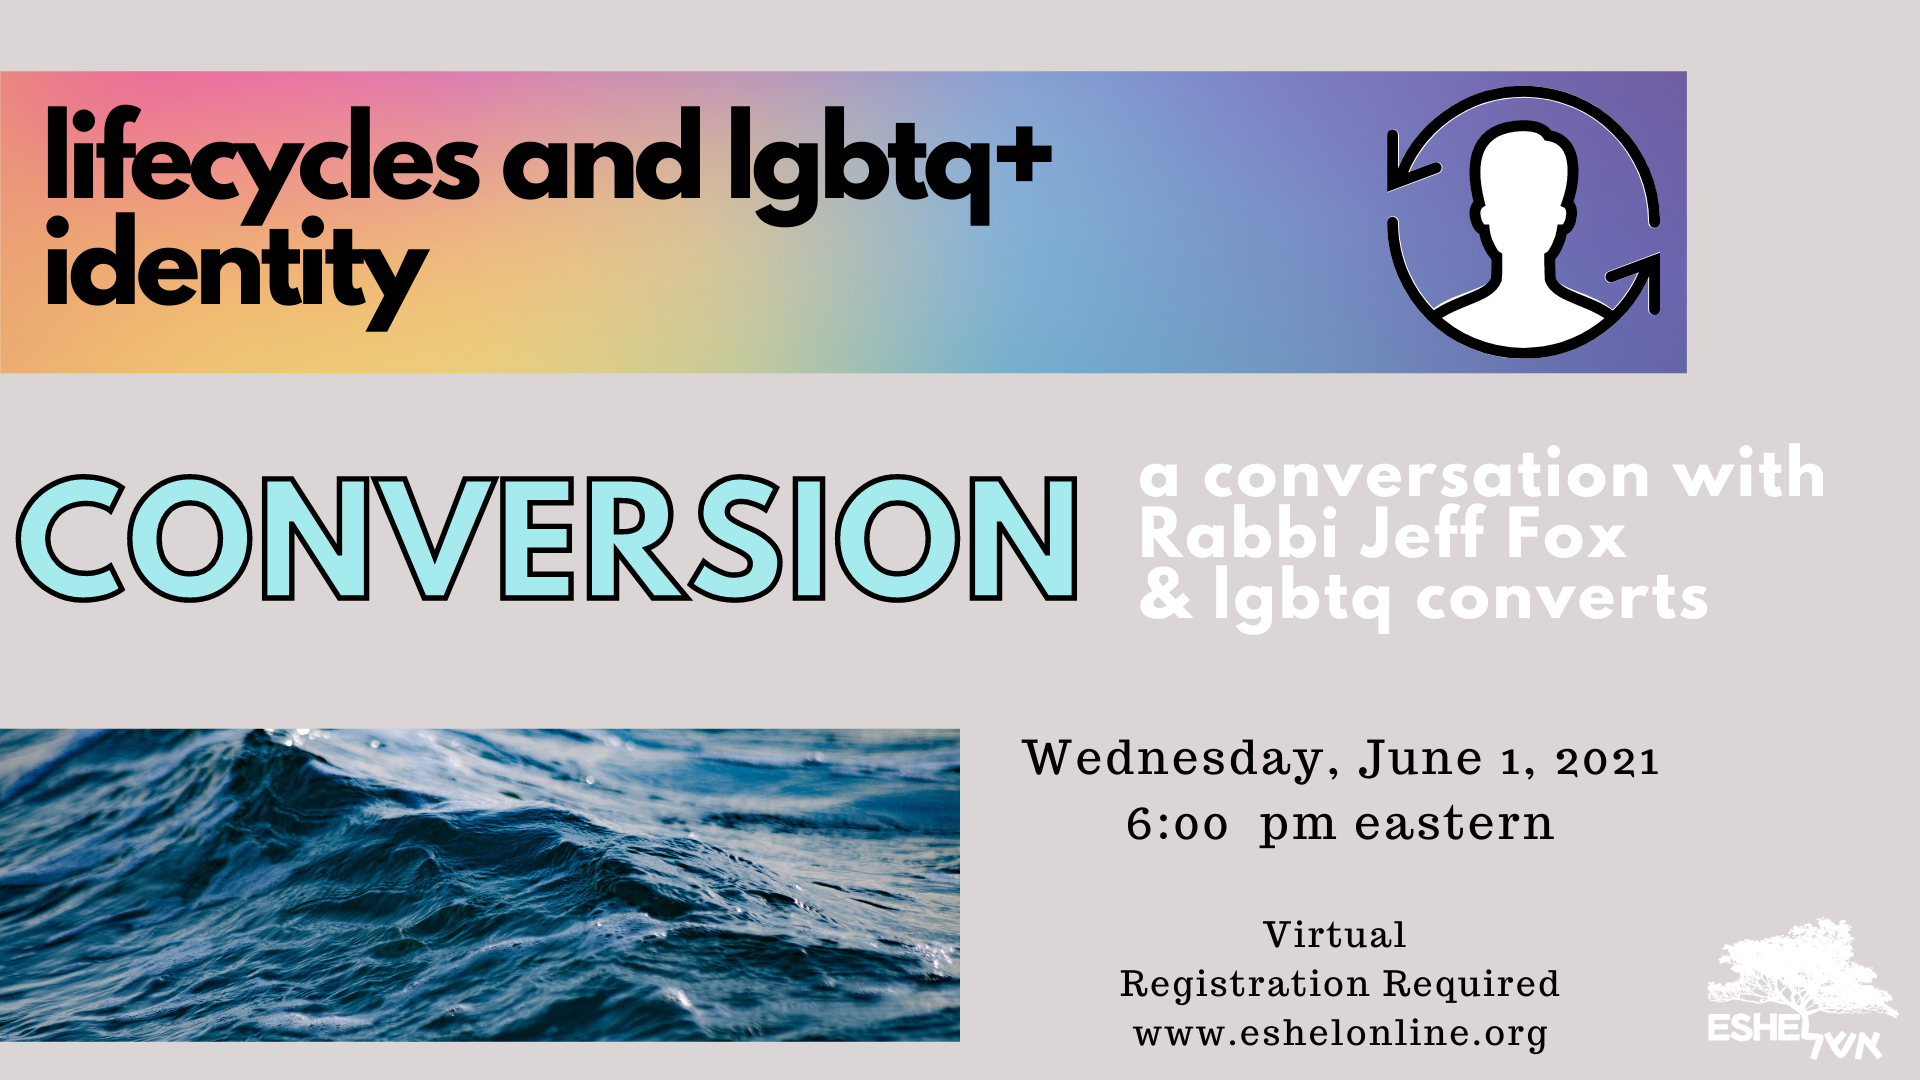 Lifecycles and LGBTQ+ Identity | Conversion: A conversation with Rabbi Jeff Fox and LGBTQ Converts, Wednesday June 1 6:00 pm Eastern, Virtual, registration required